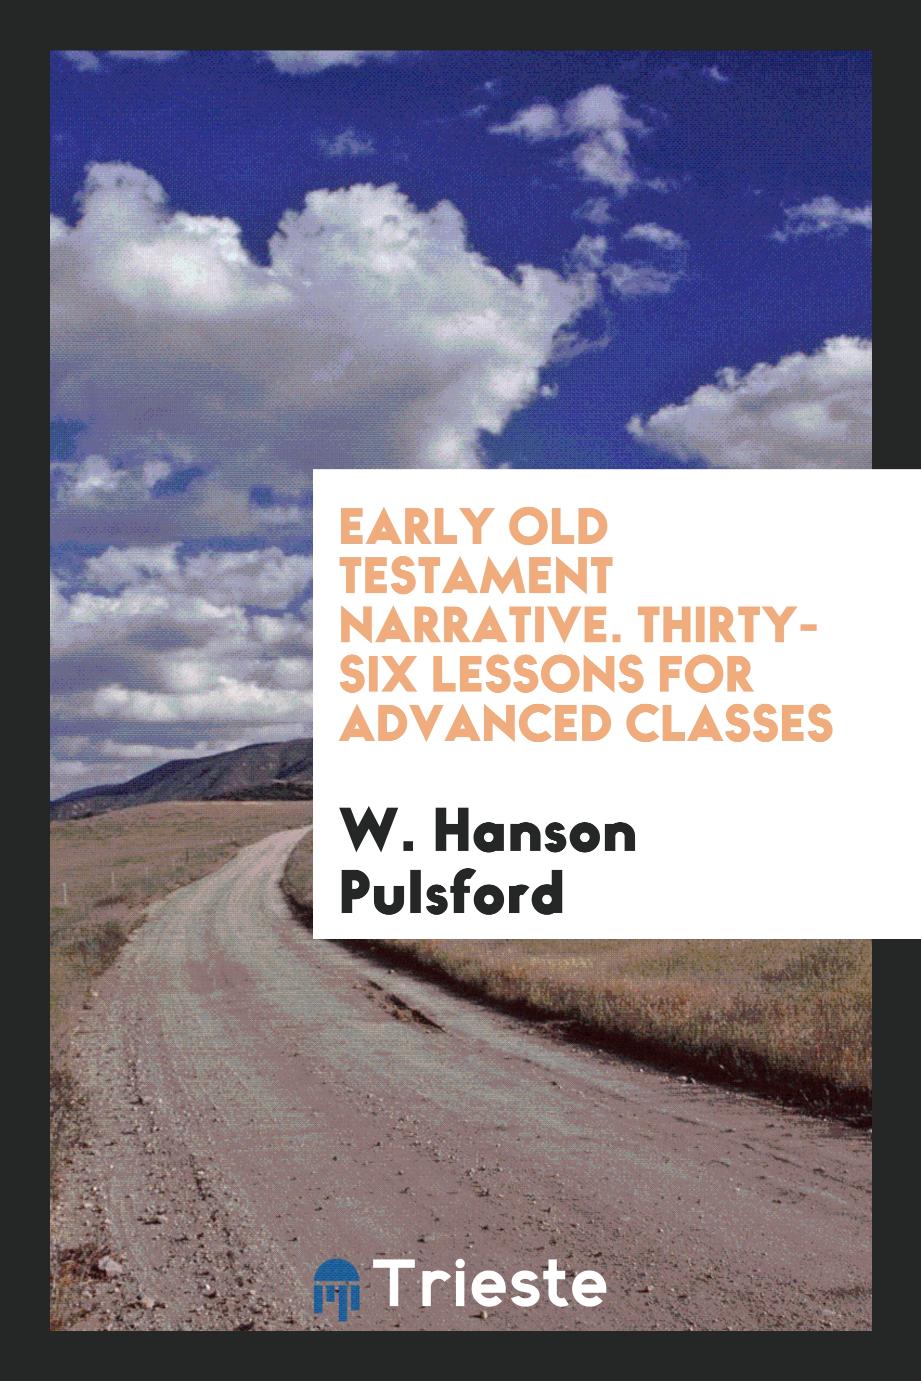 Early Old Testament Narrative. Thirty-six lessons for advanced classes